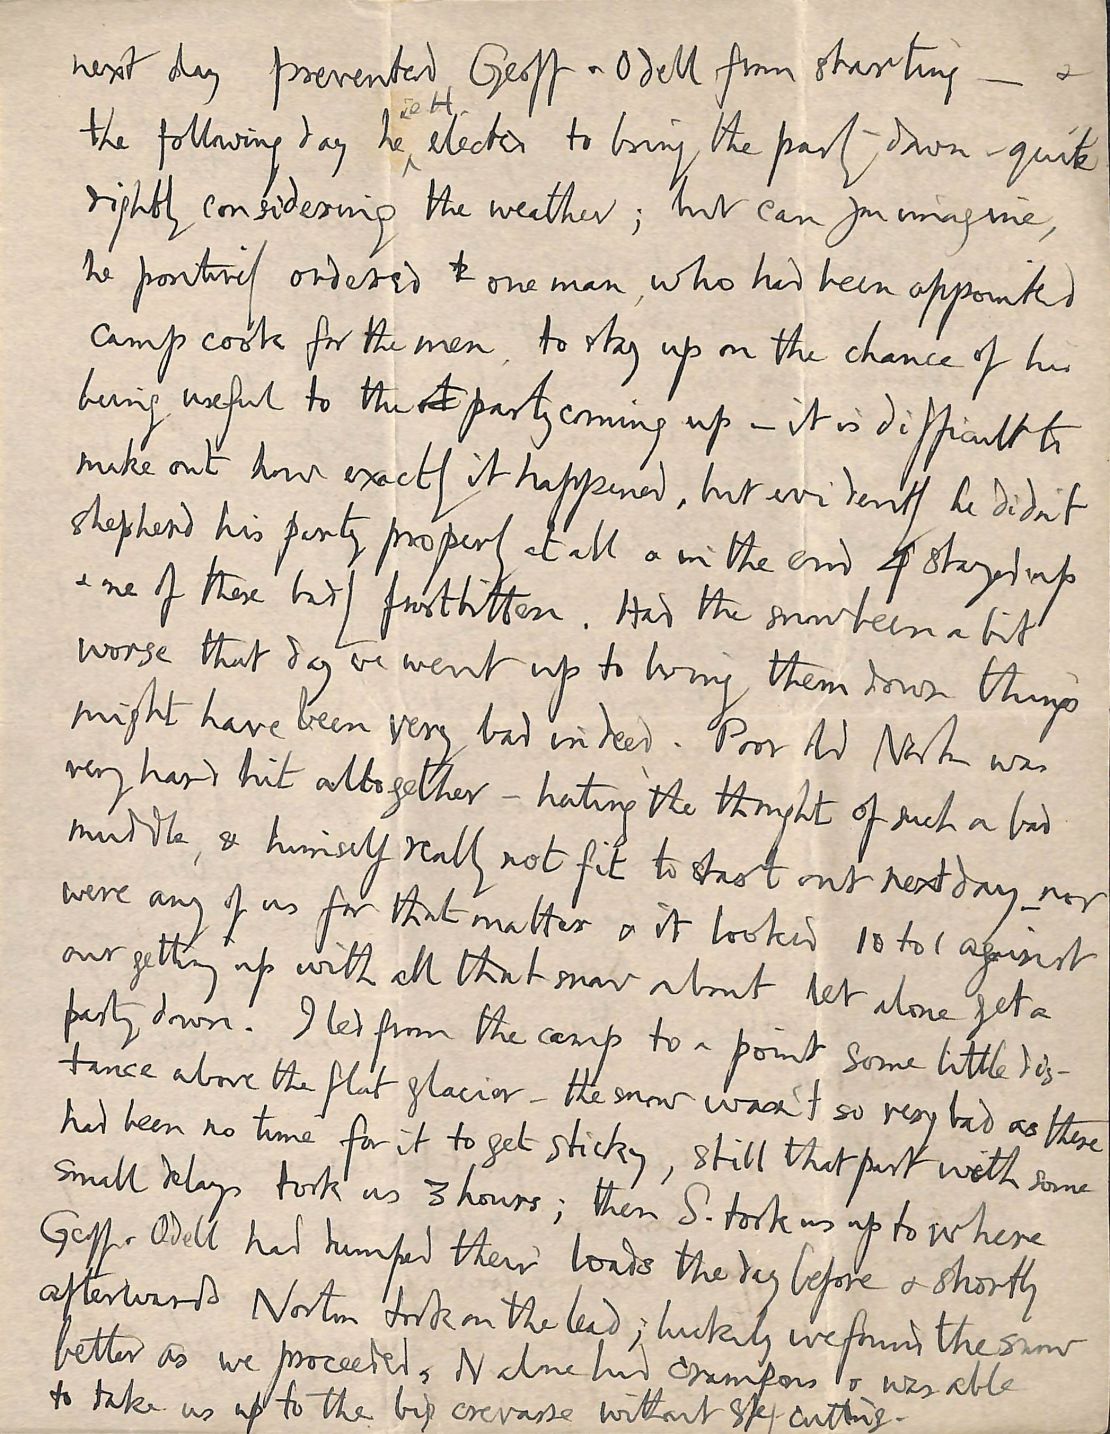 The collection at Magdalene College includes around 840 letters spanning from 1914 to 1924.